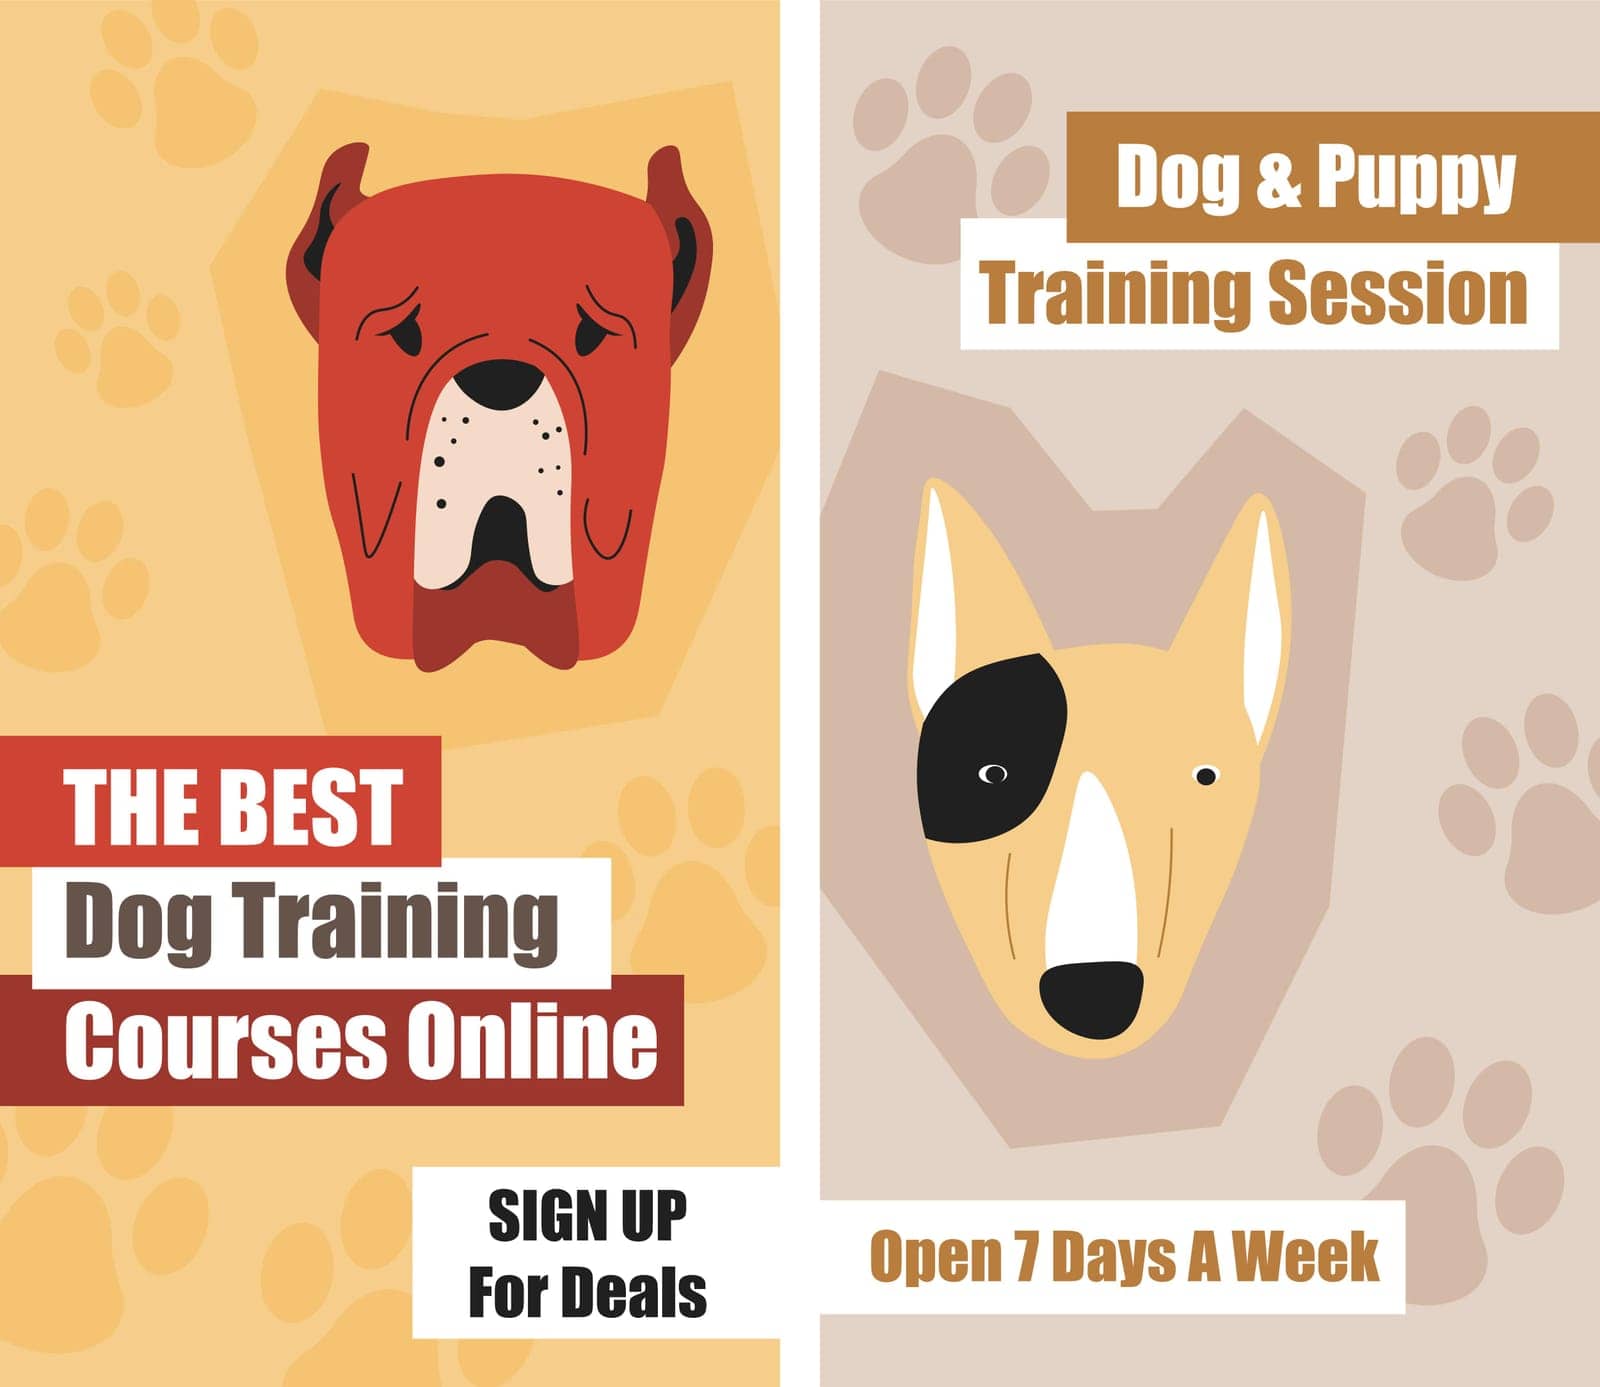 Training session for dogs and puppies, course online for teaching new tricks. Sign up for deals, open 7 days a week. Care for domestic animal, pets and loyal friends studying. Vector in flat style